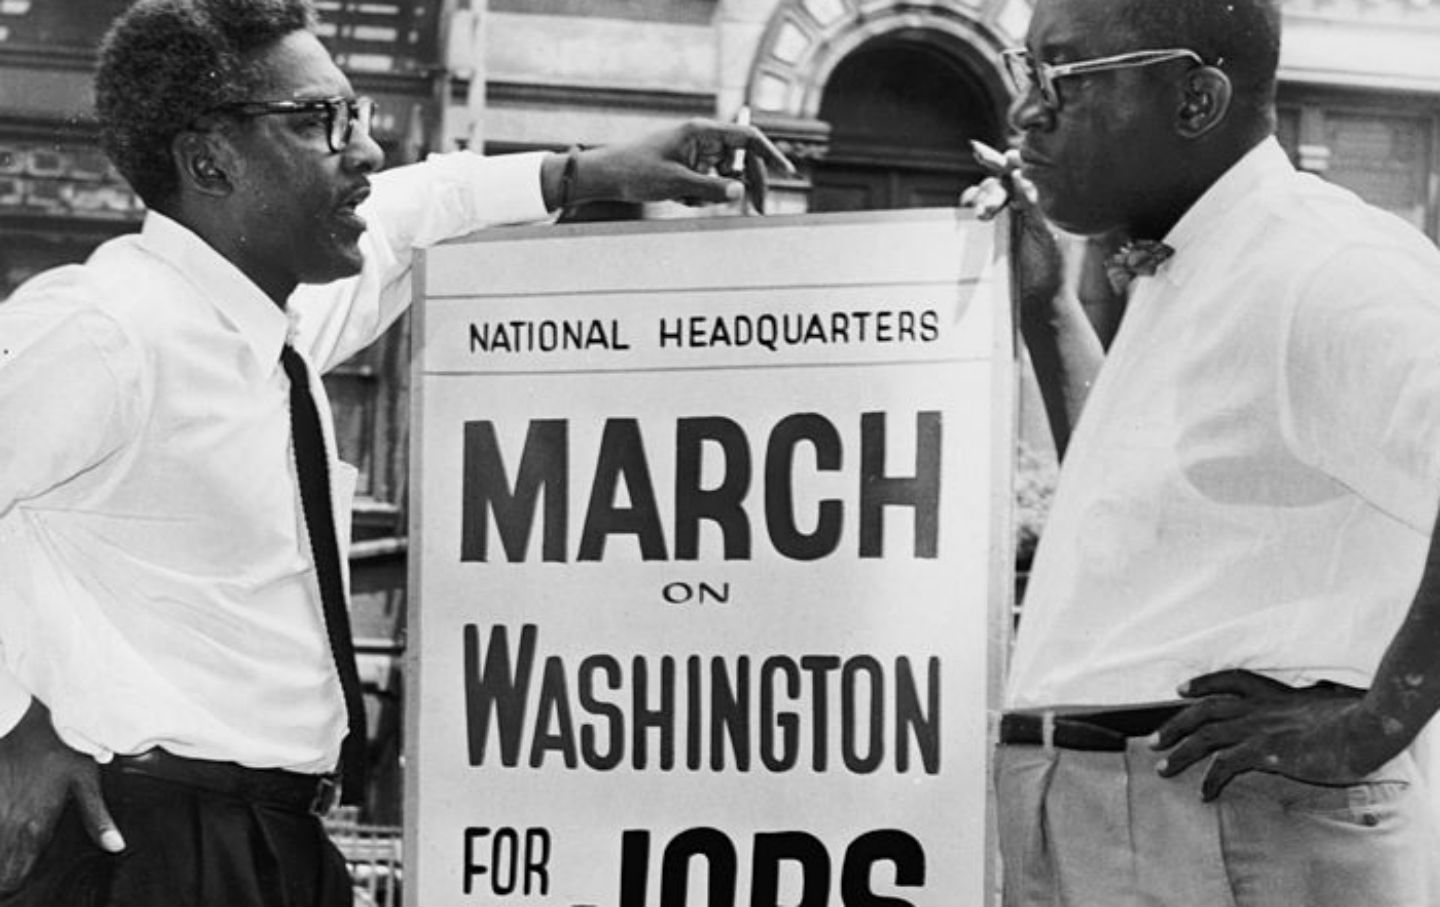 August 28, 1963: The March on Washington